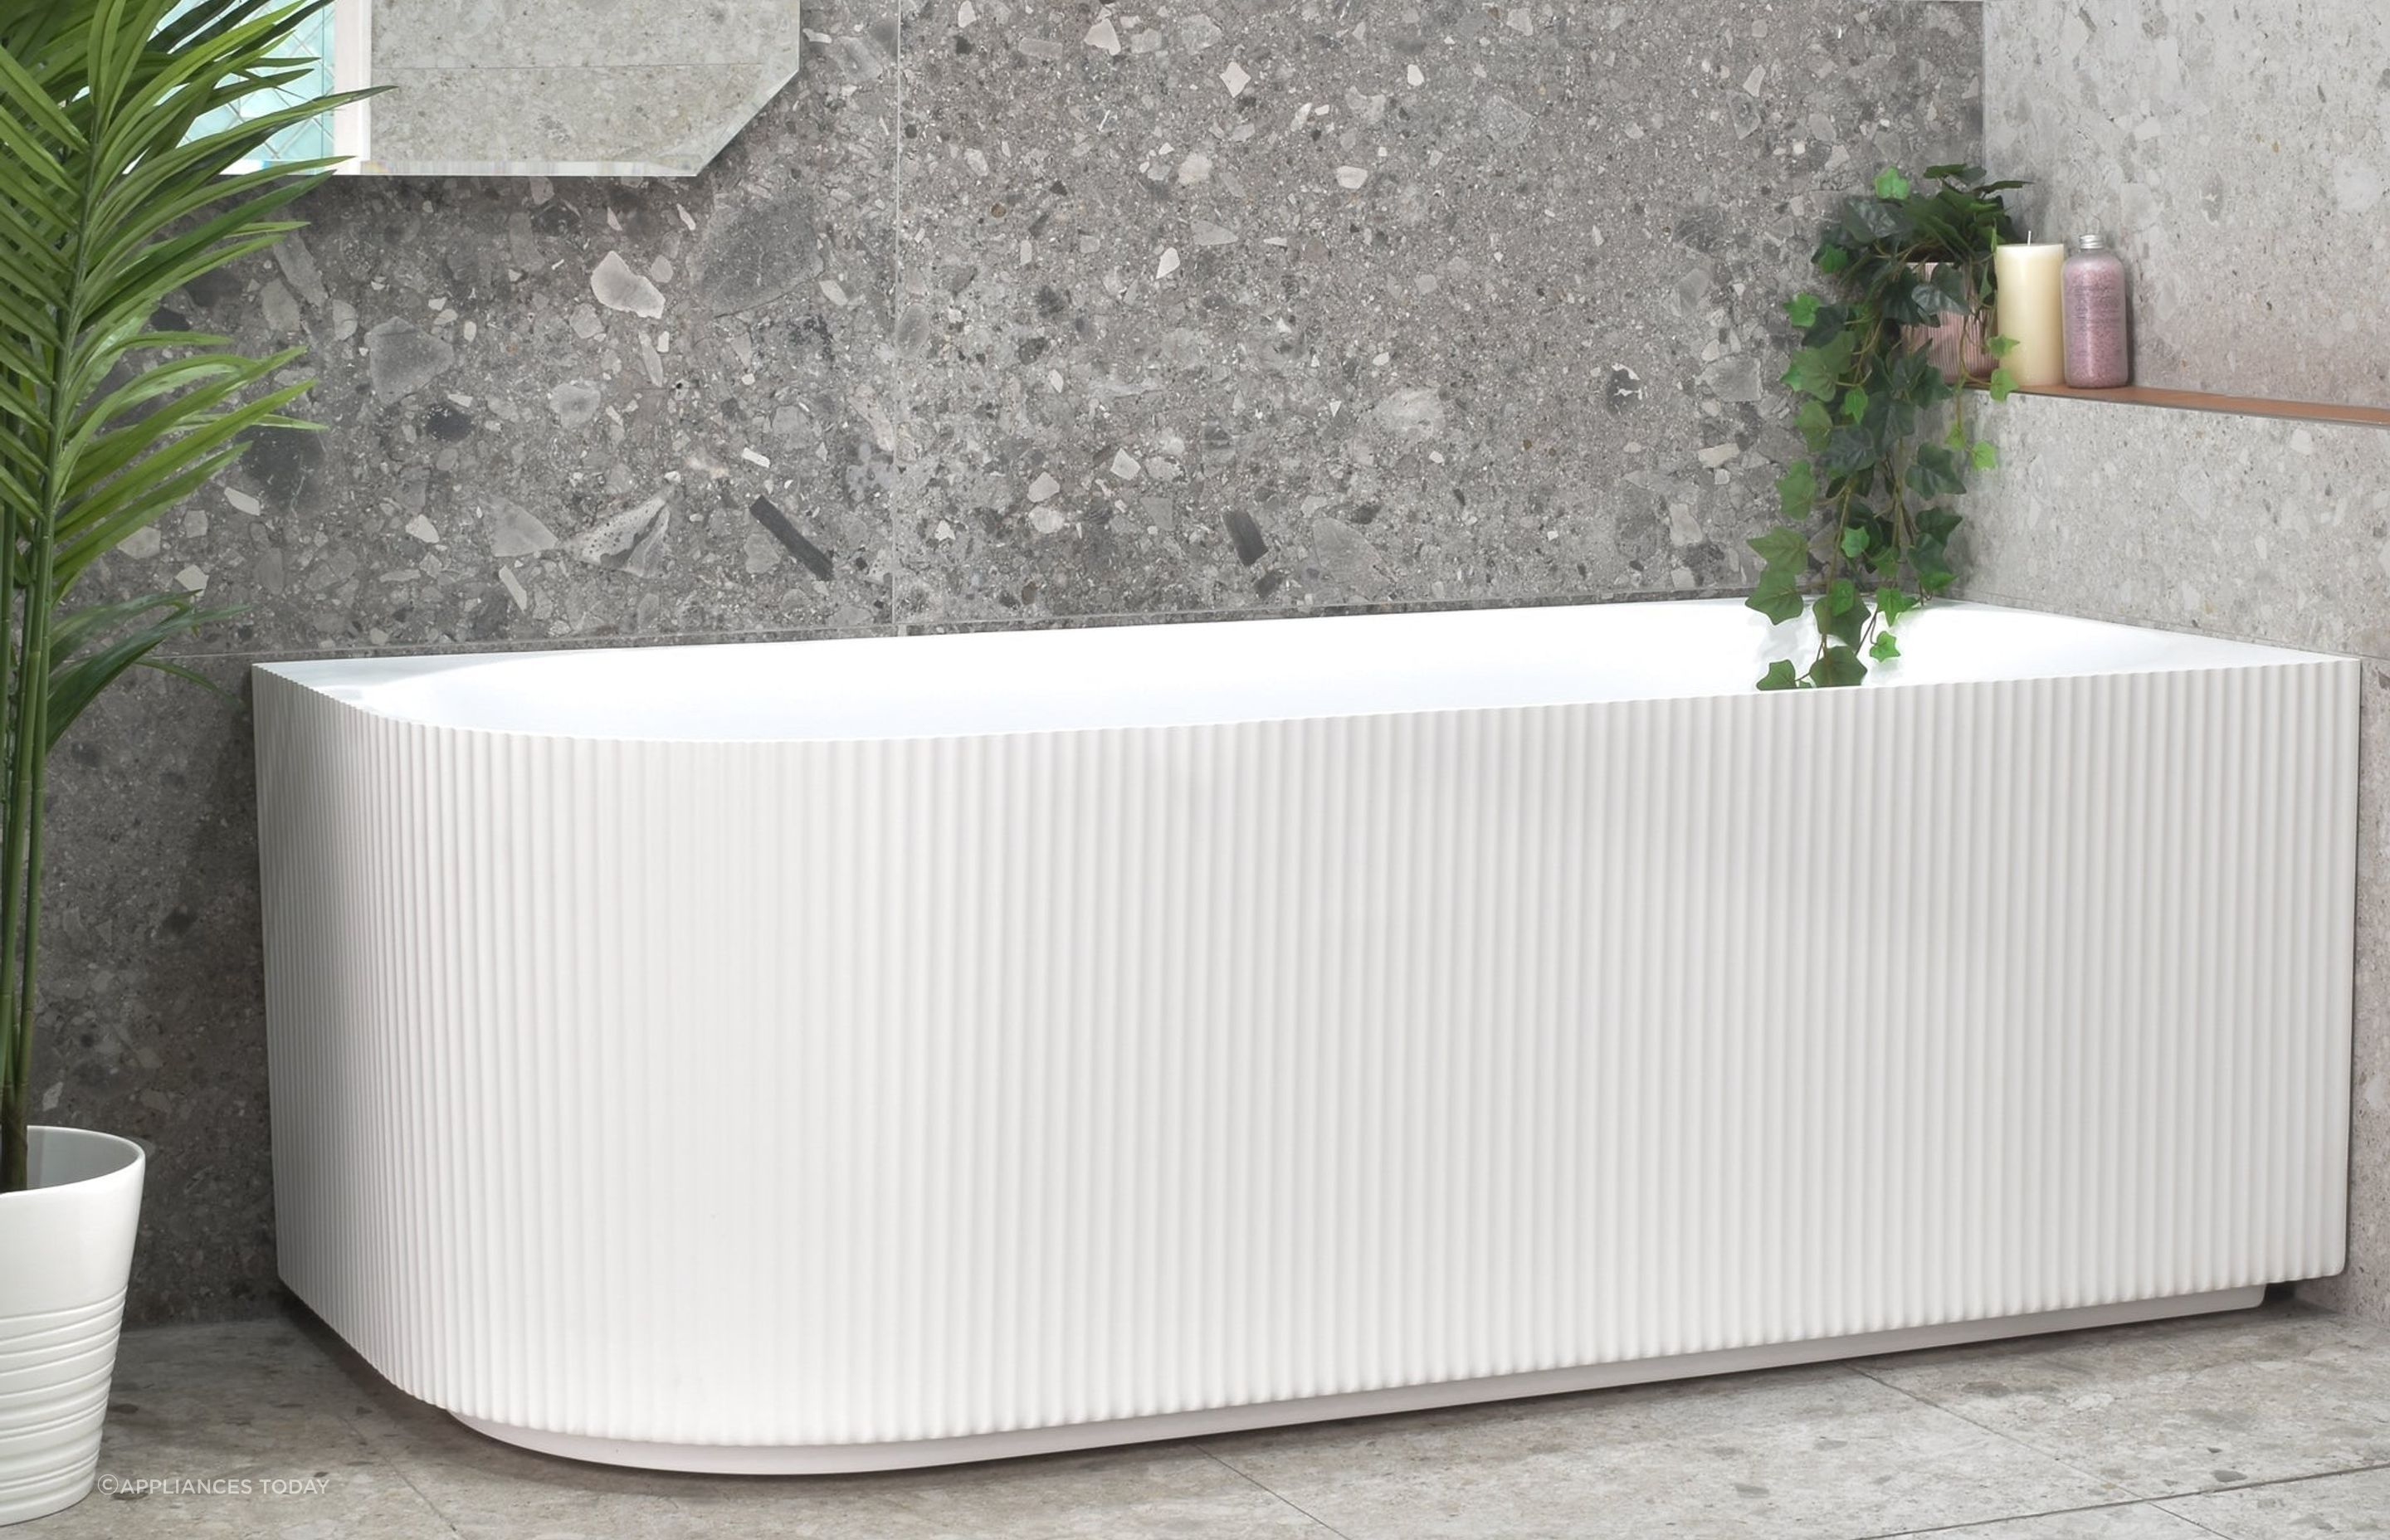 The uniqiue fluted design of the Brighton Groove Fluted Oval Freestanding Right Corner Bath injects texture and depth in a space.